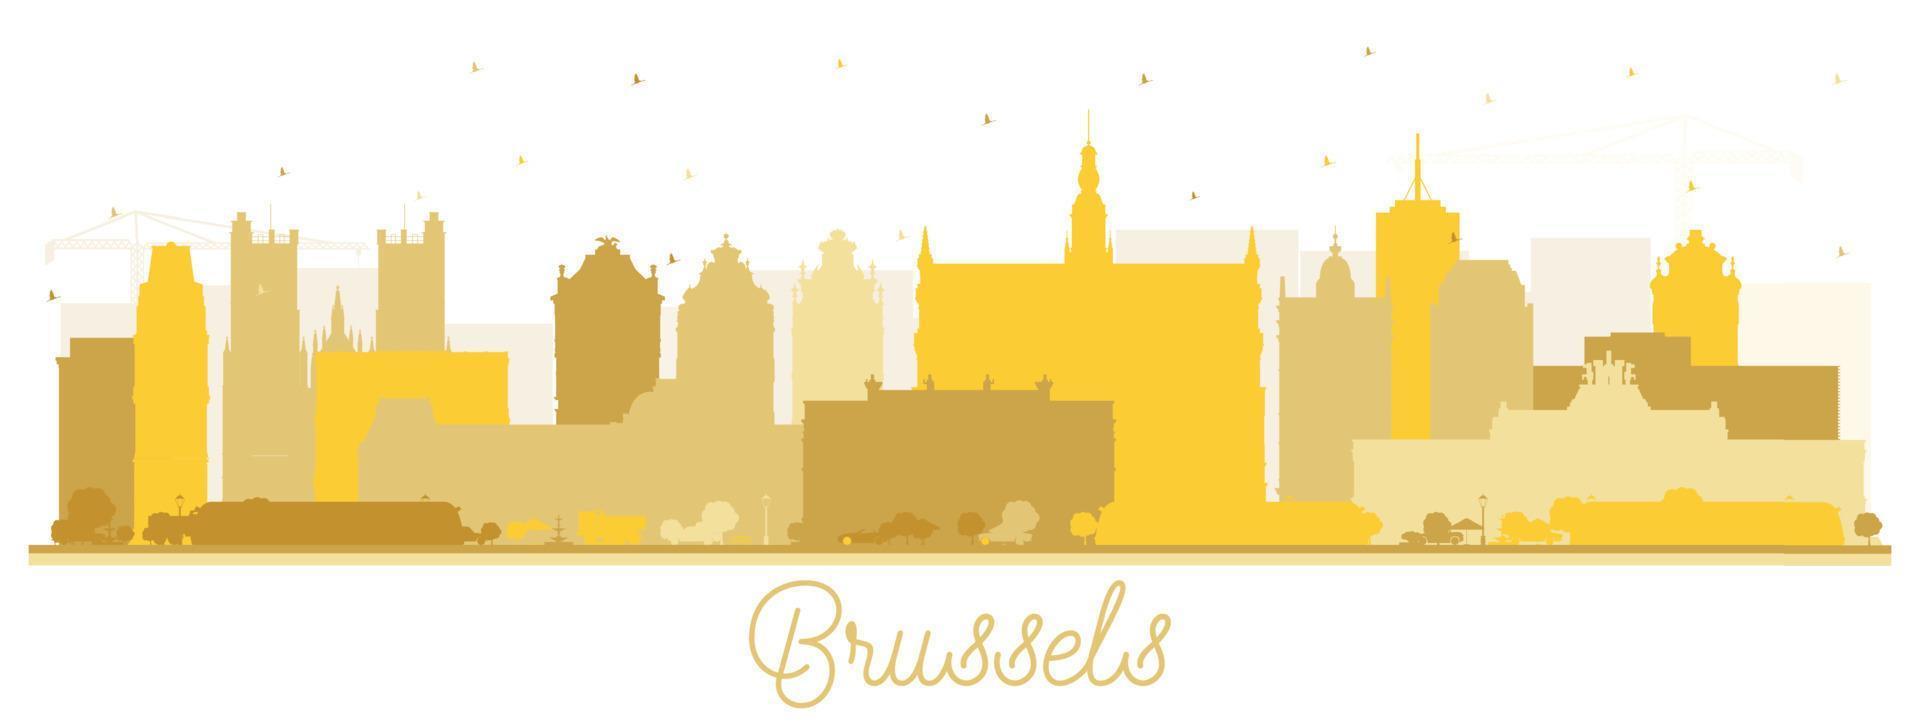 Brussels Belgium City Skyline Silhouette with Golden Buildings Isolated on White. vector